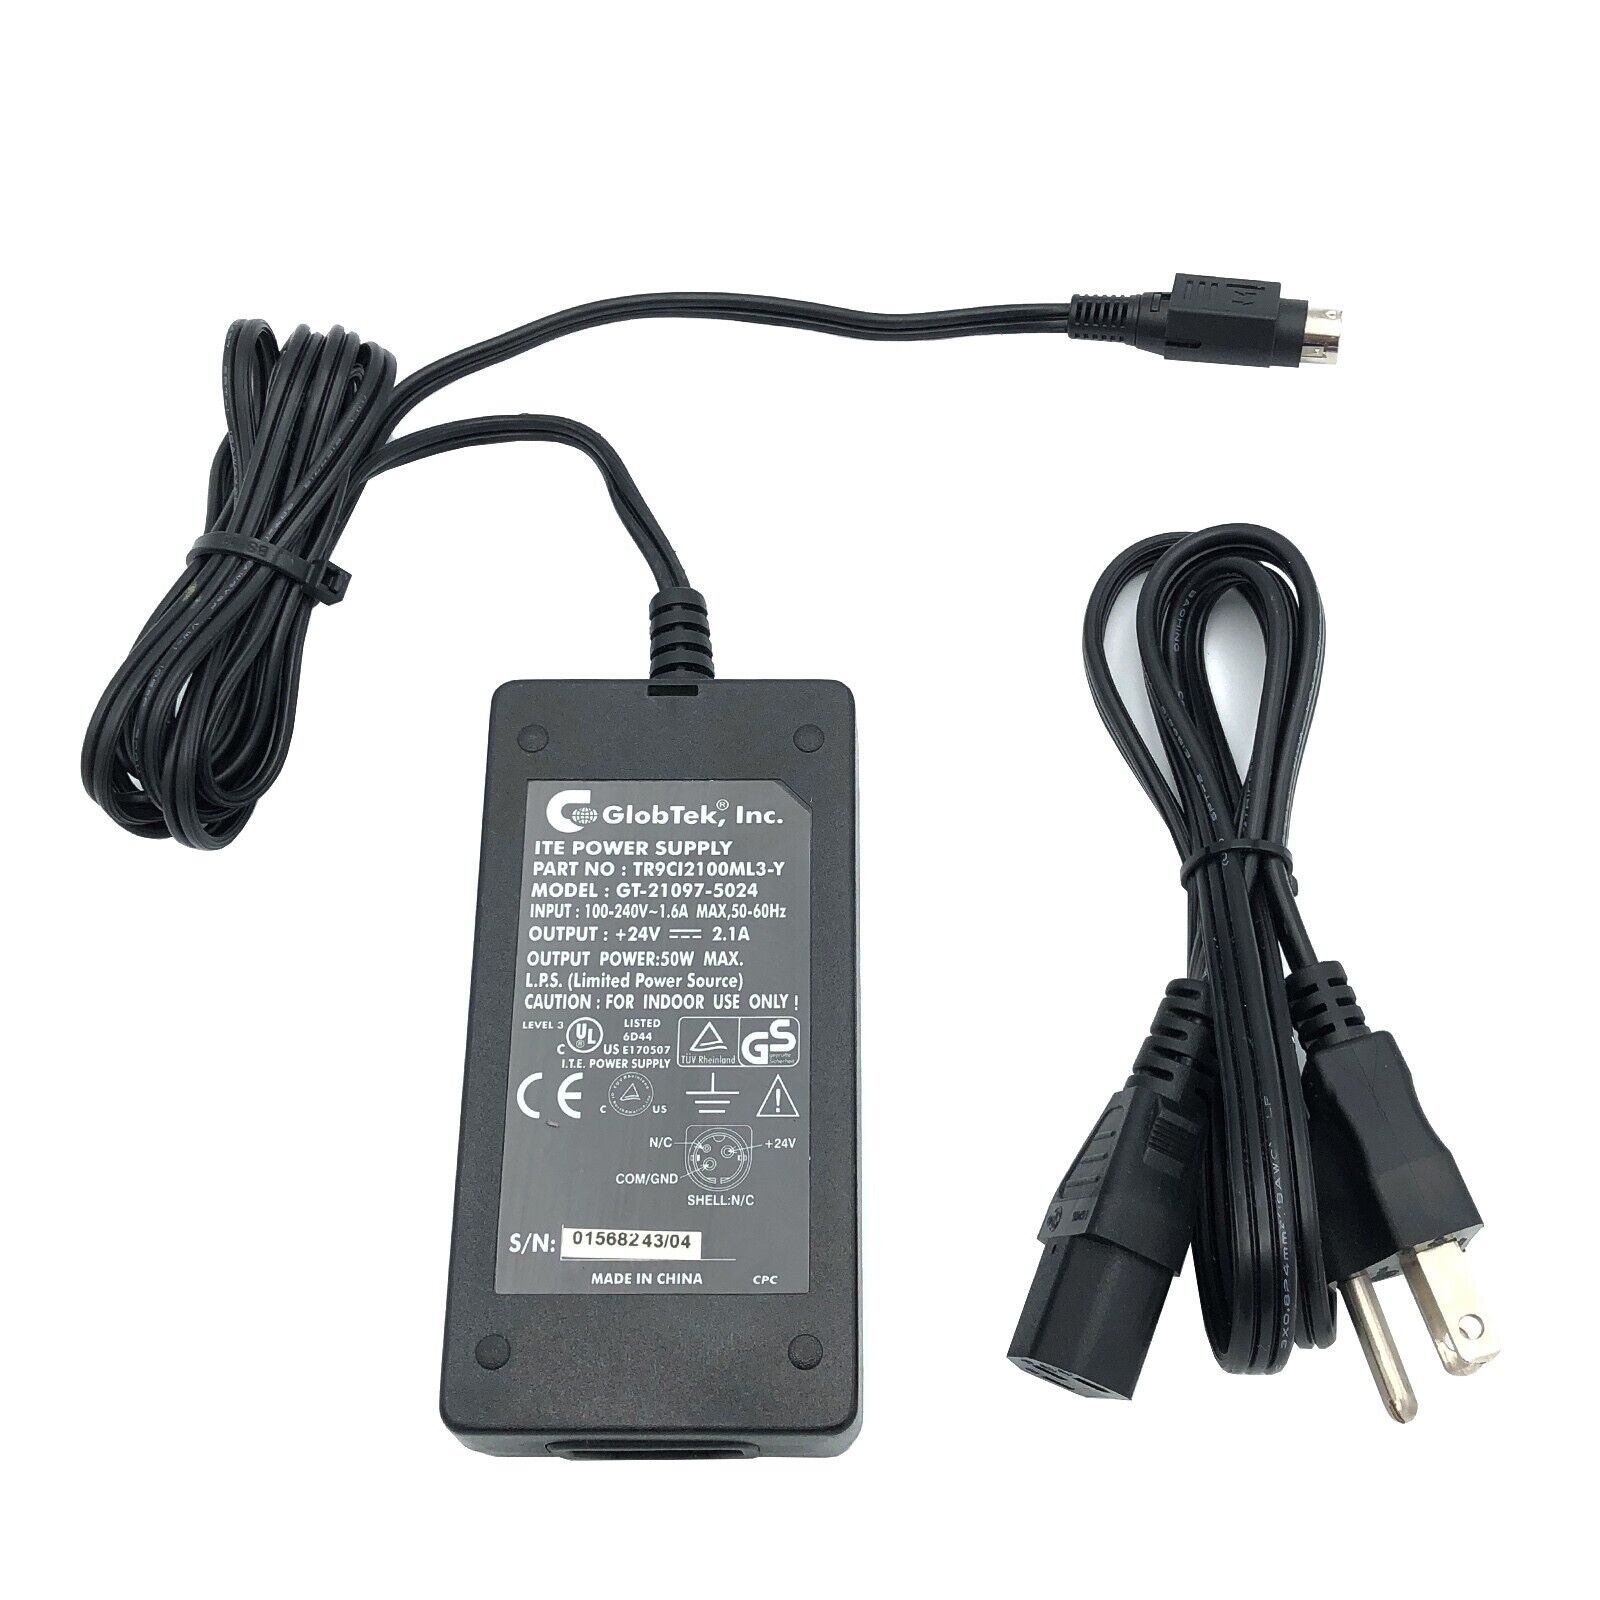 New Original Shenzhen pi-top YHY-18003000 AC/DC Power Supply Adapter 18V 3A w/PC Brand Shenzhen Type AC/DC Adapter Colo